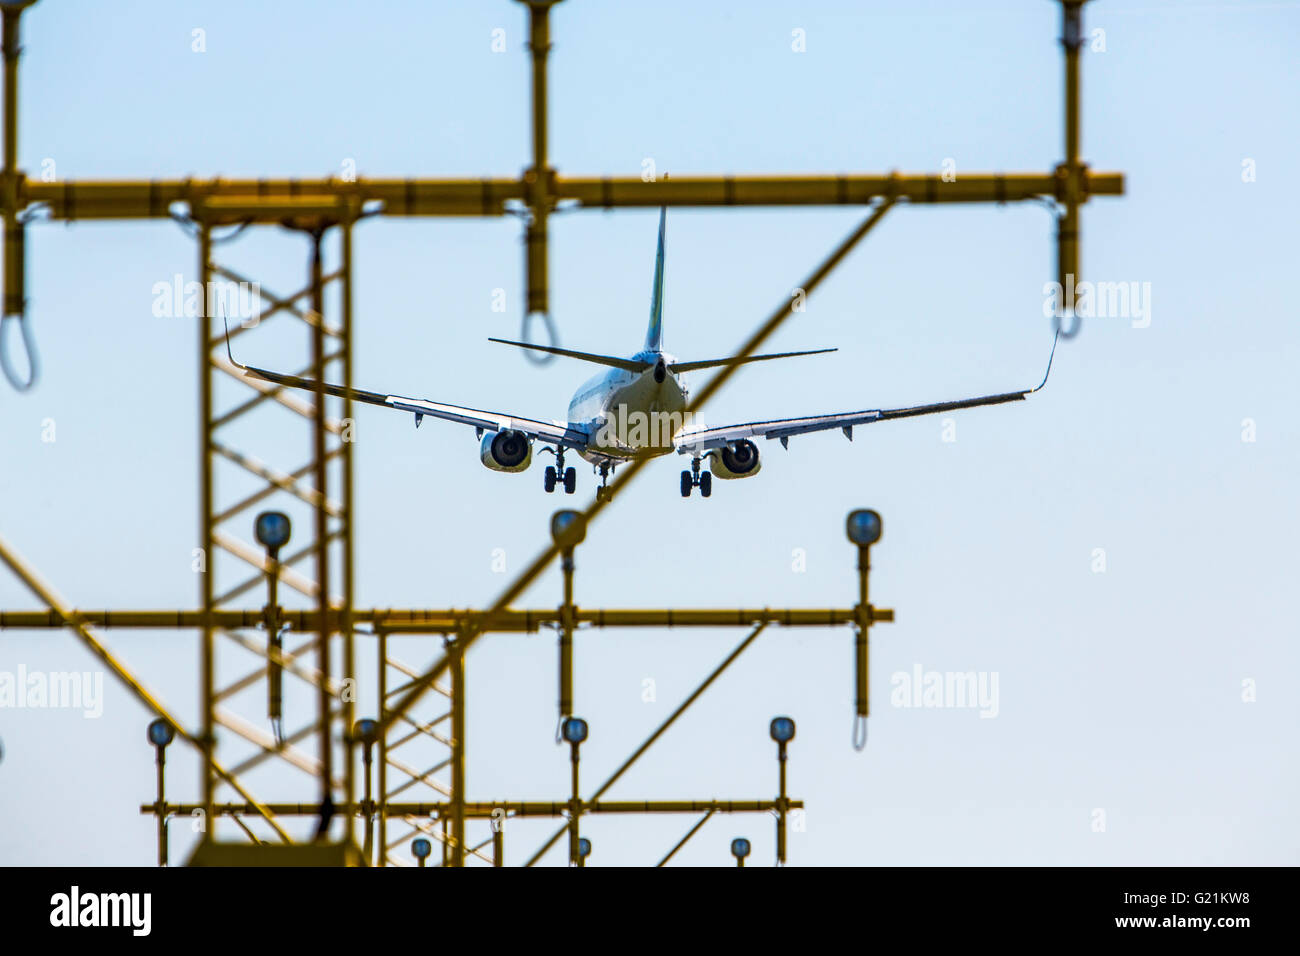 Amsterdam Schiphol Airport, plane approaches the runway, landing on Polderbaan, 18R / 36L, Stock Photo